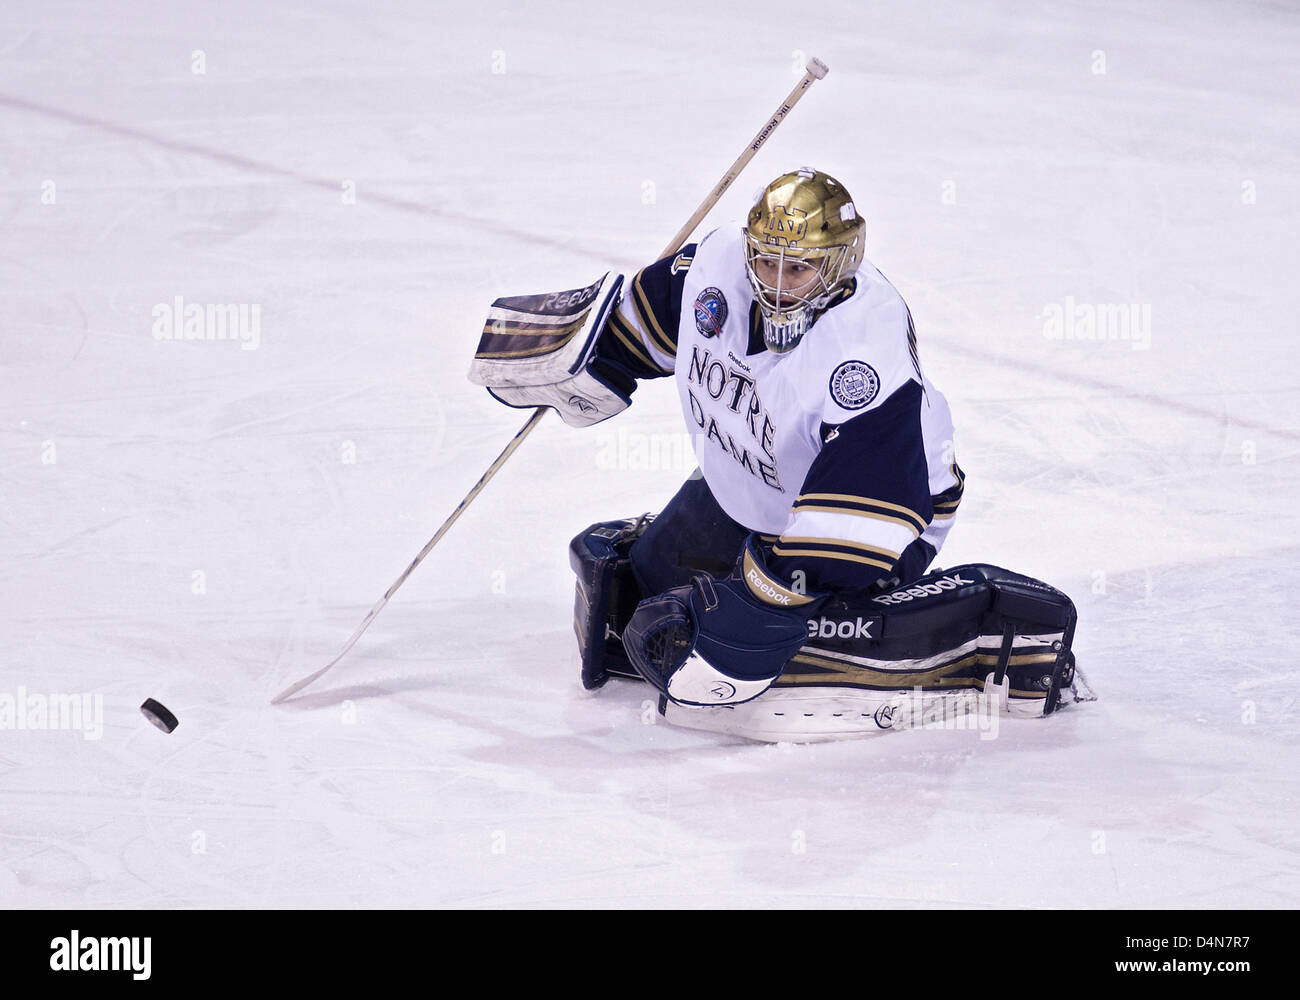 March 16, 2013 - South Bend, Indiana, United States of America - March 16, 2013: Notre Dame goaltender Steven Summerhays (1) makes the save during NCAA Hockey game action between the Notre Dame Fighting Irish and the Bowling Green Falcons at Compton Family Ice Arena in South Bend, Indiana. Notre Dame defeated Bowling Green 4-3. Stock Photo